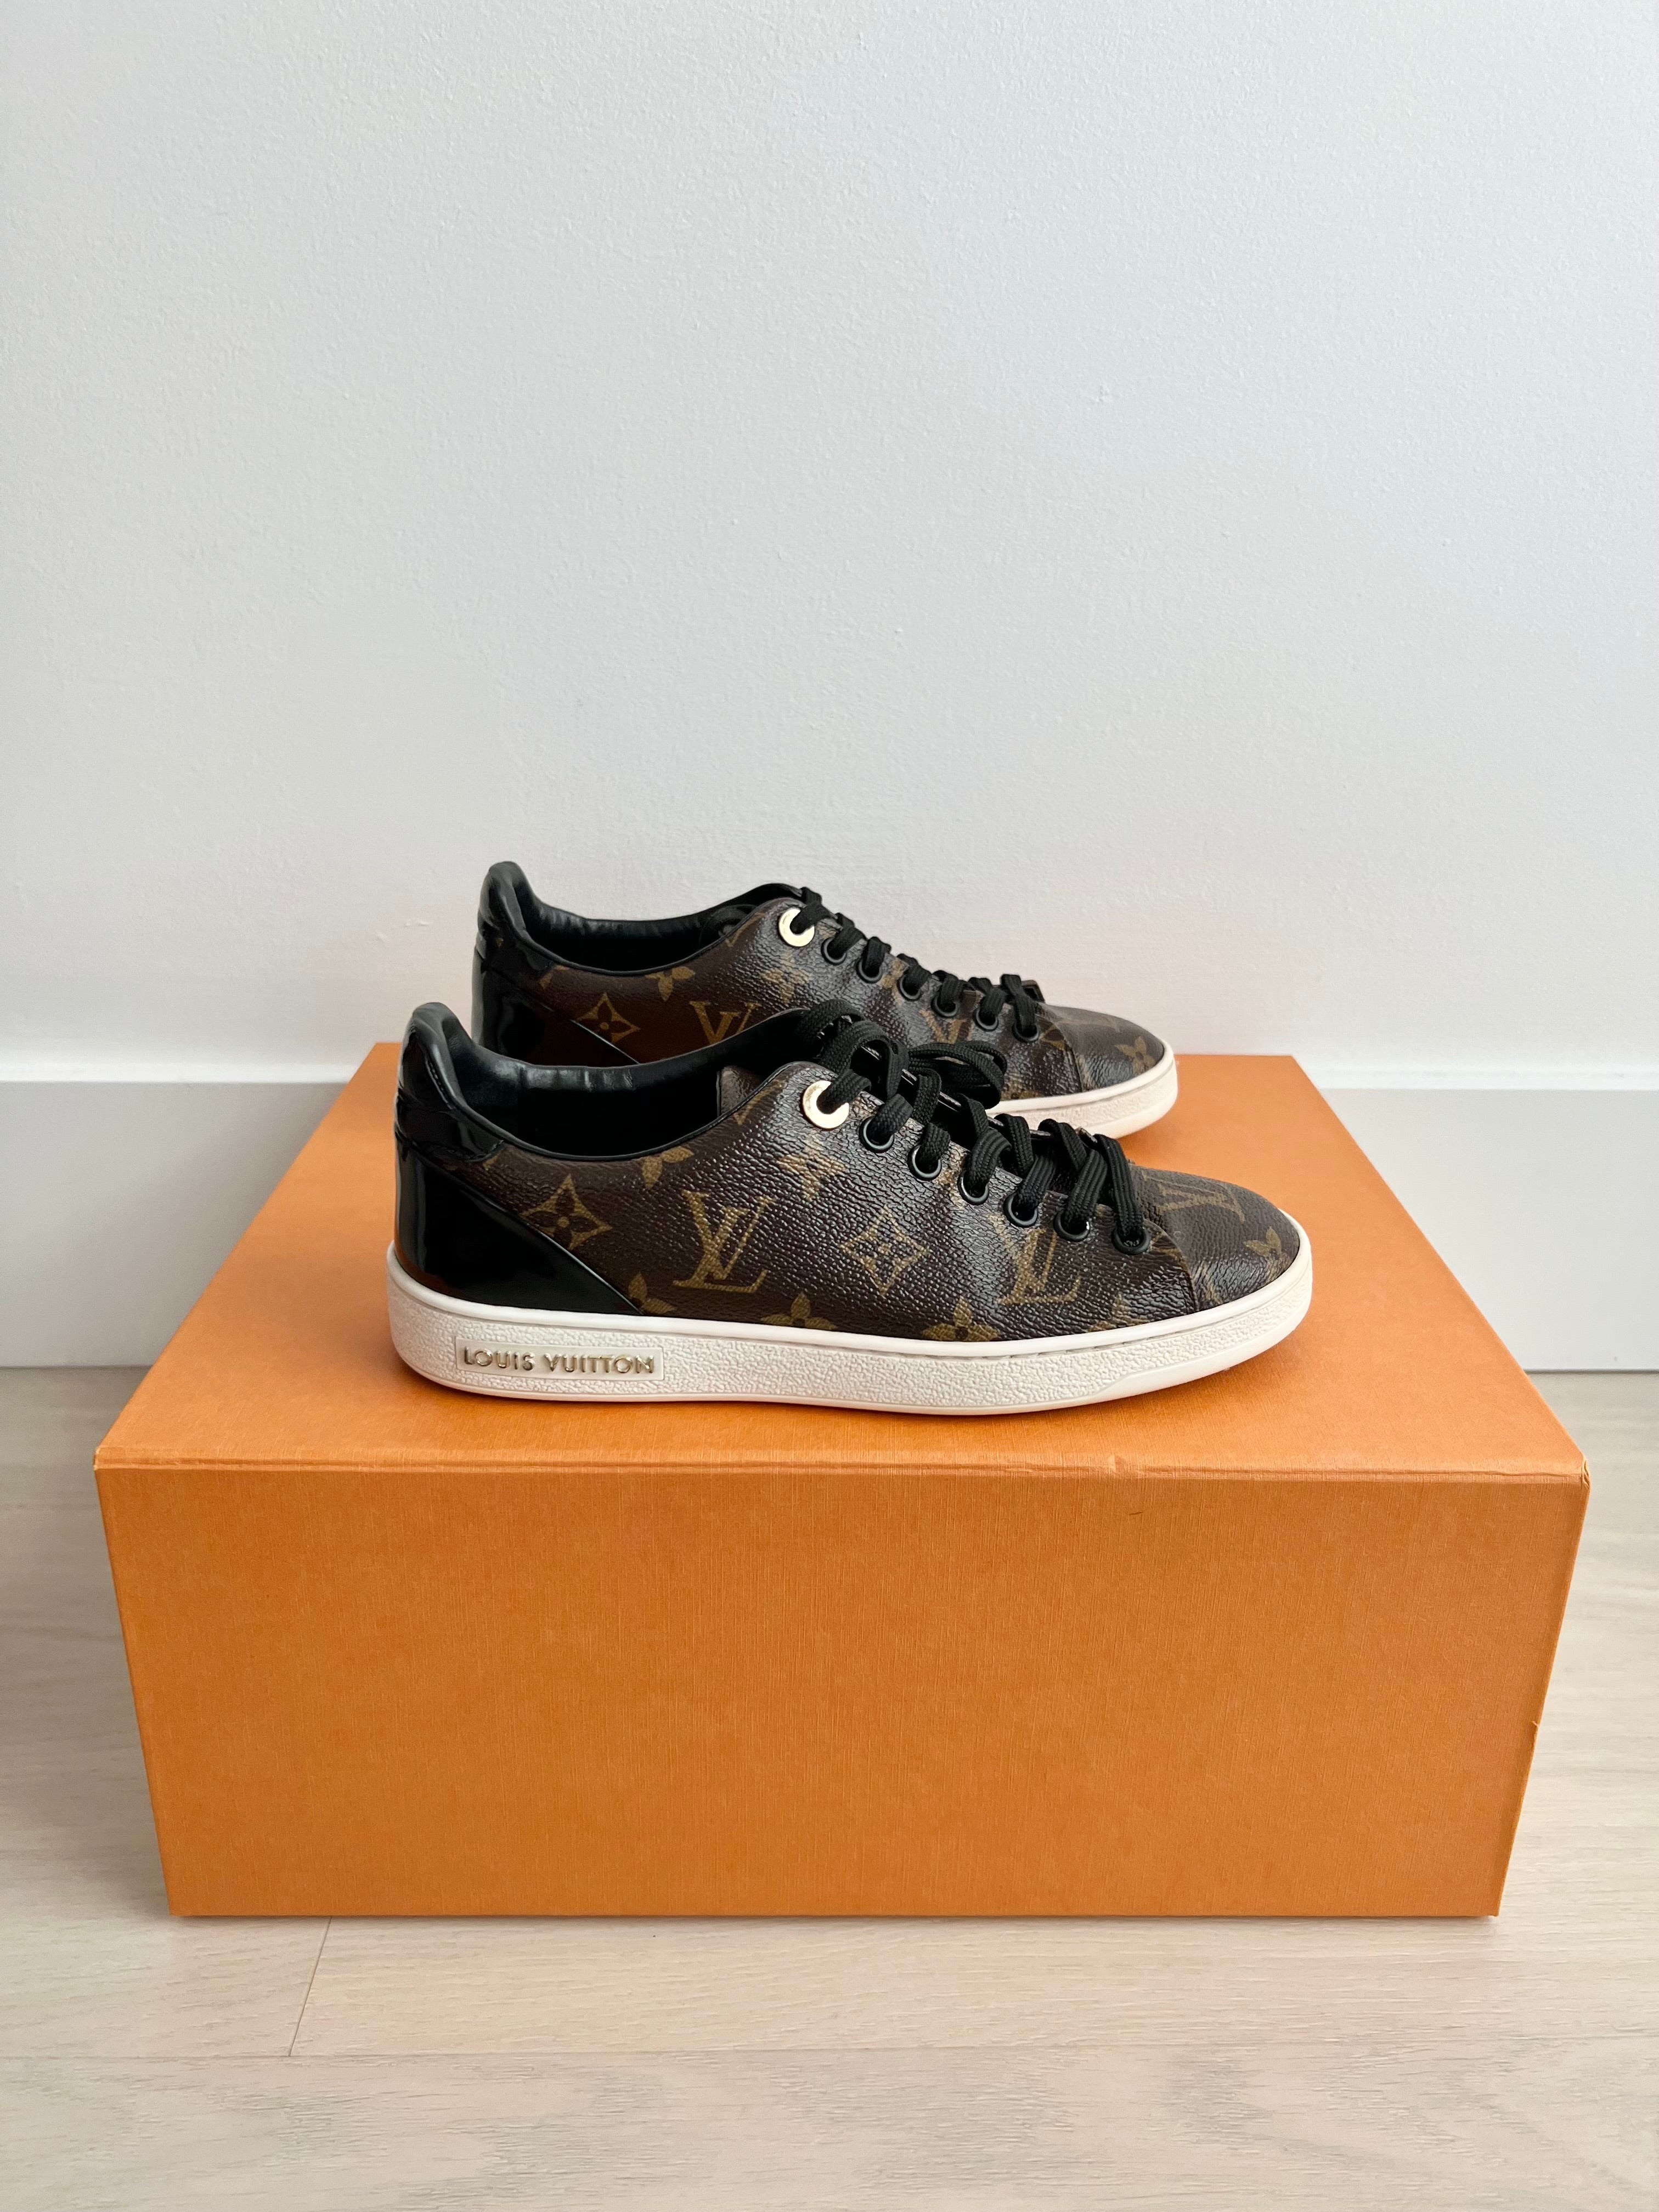 Louis Vuitton Front Row Sneakers for Sale in Upland, CA - OfferUp